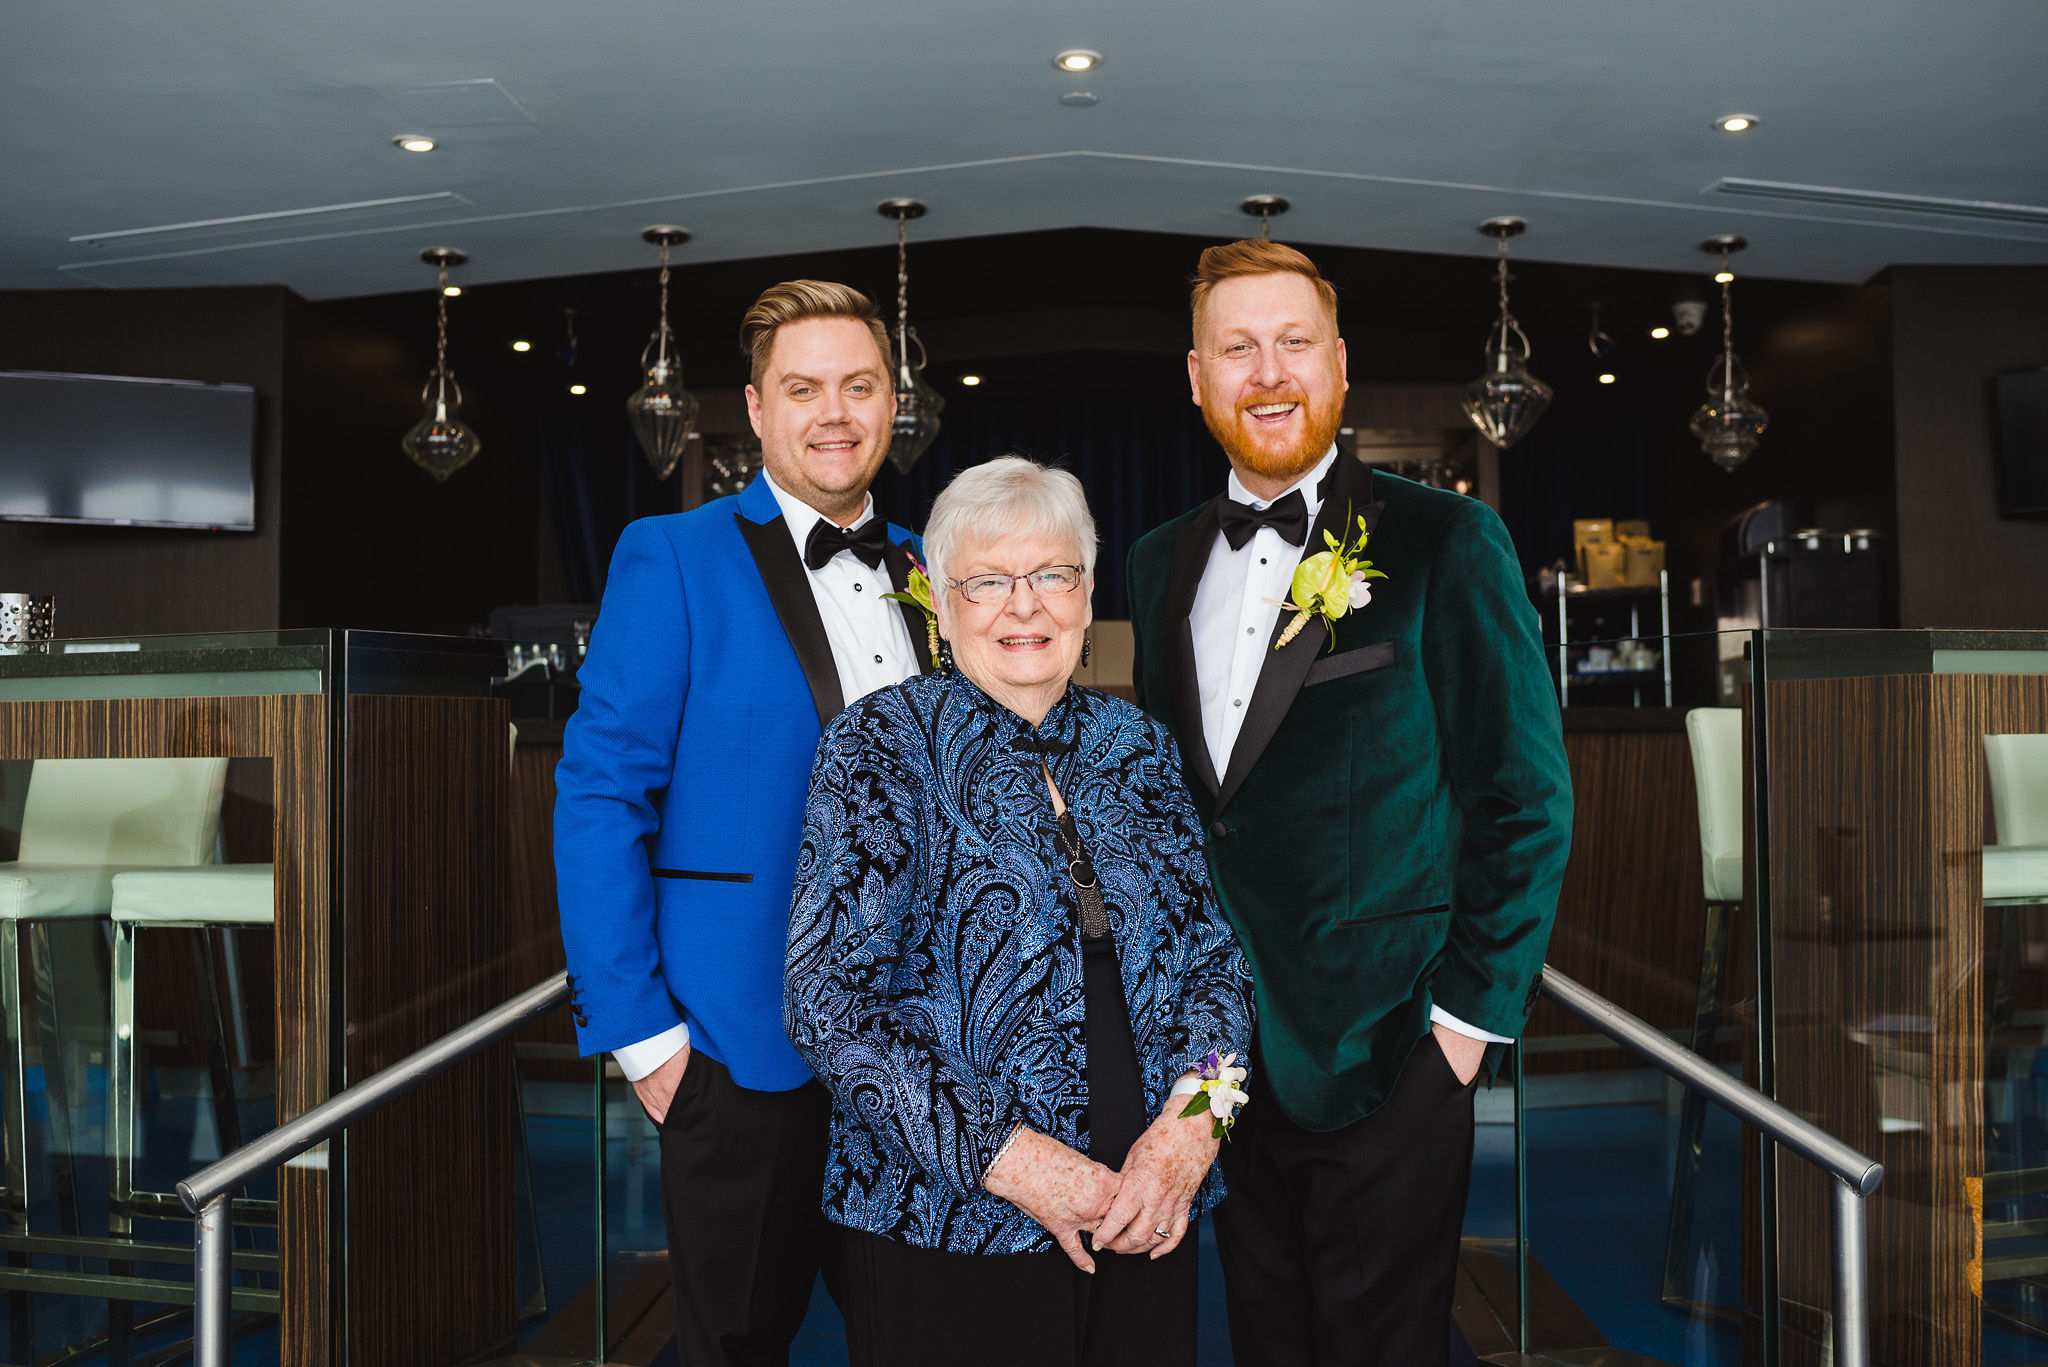 Grooms standing behind the grandmother before wedding ceremony at the Hilton hotel in Niagara Falls